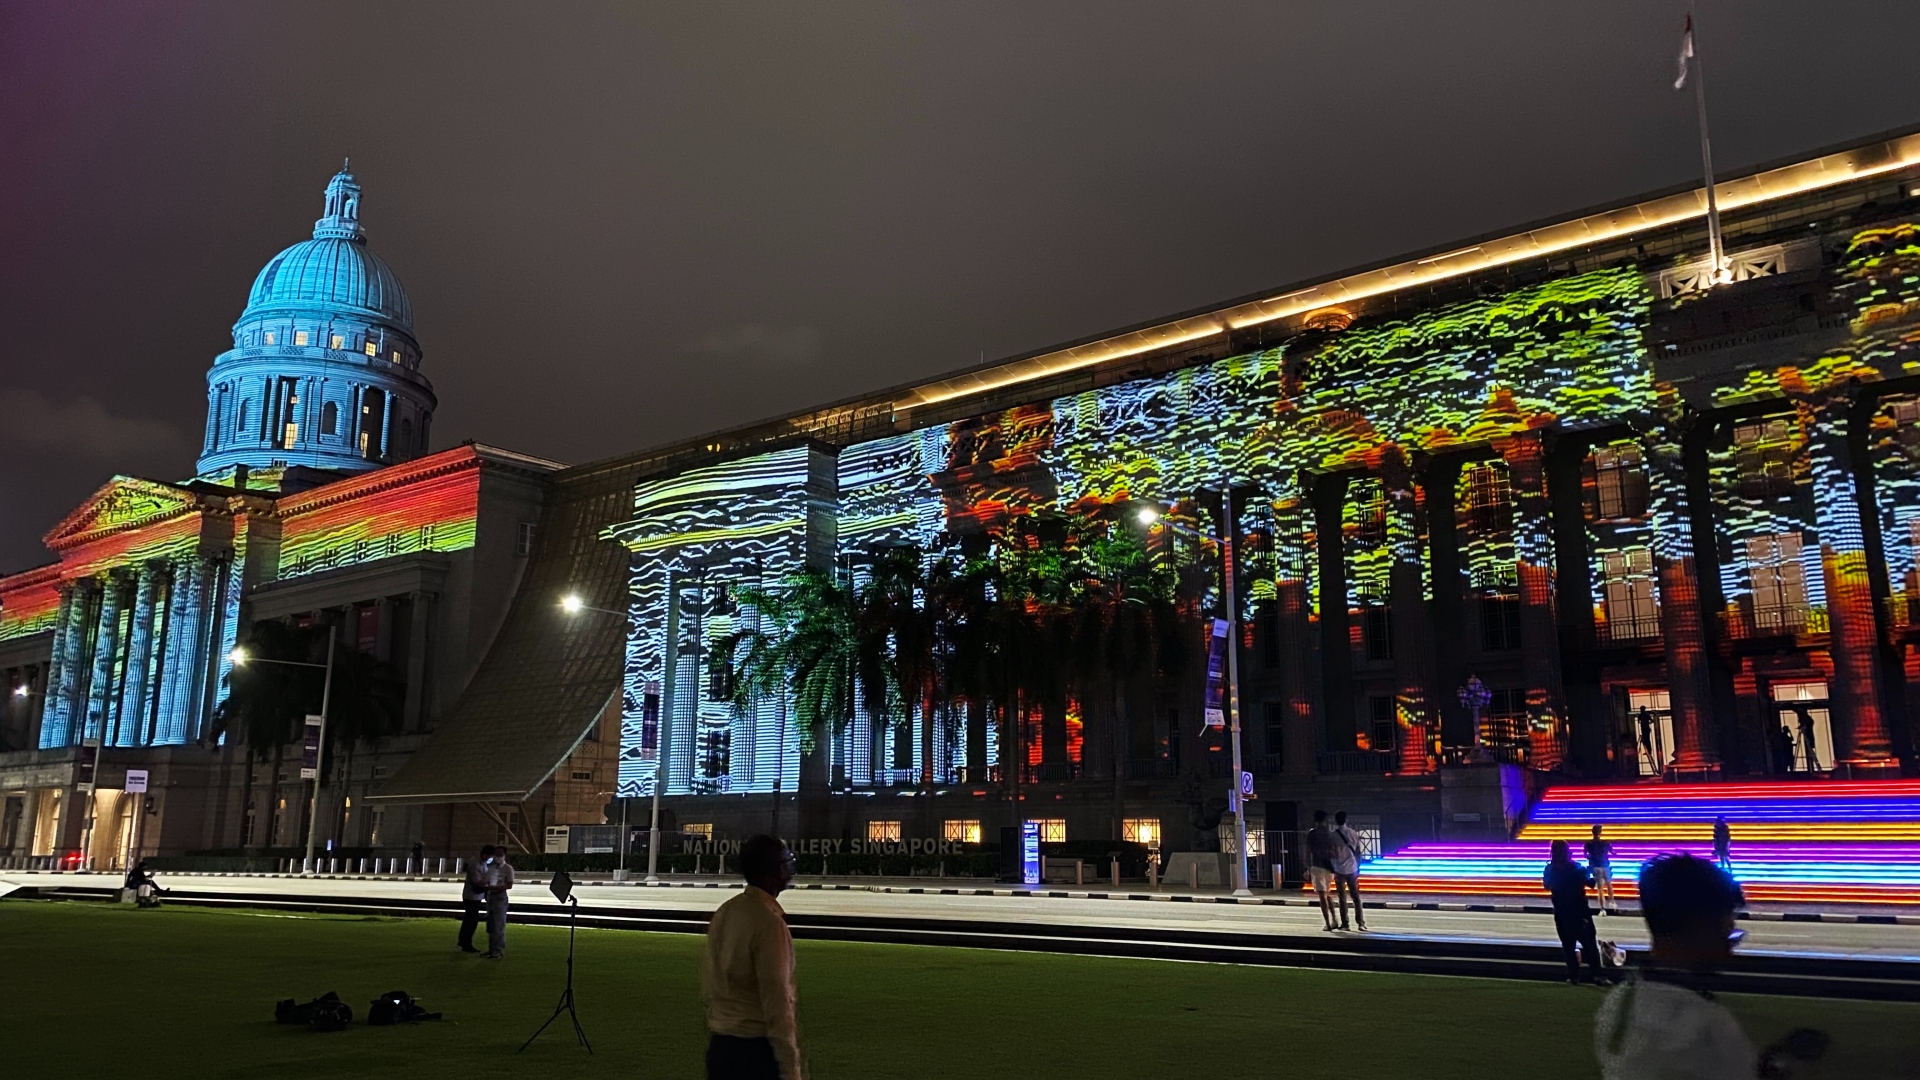 Light projection “(Re)rooting” by artists Joanne Ho and W.Y. Huang at the National Gallery Singapore. Photo: Coconuts
